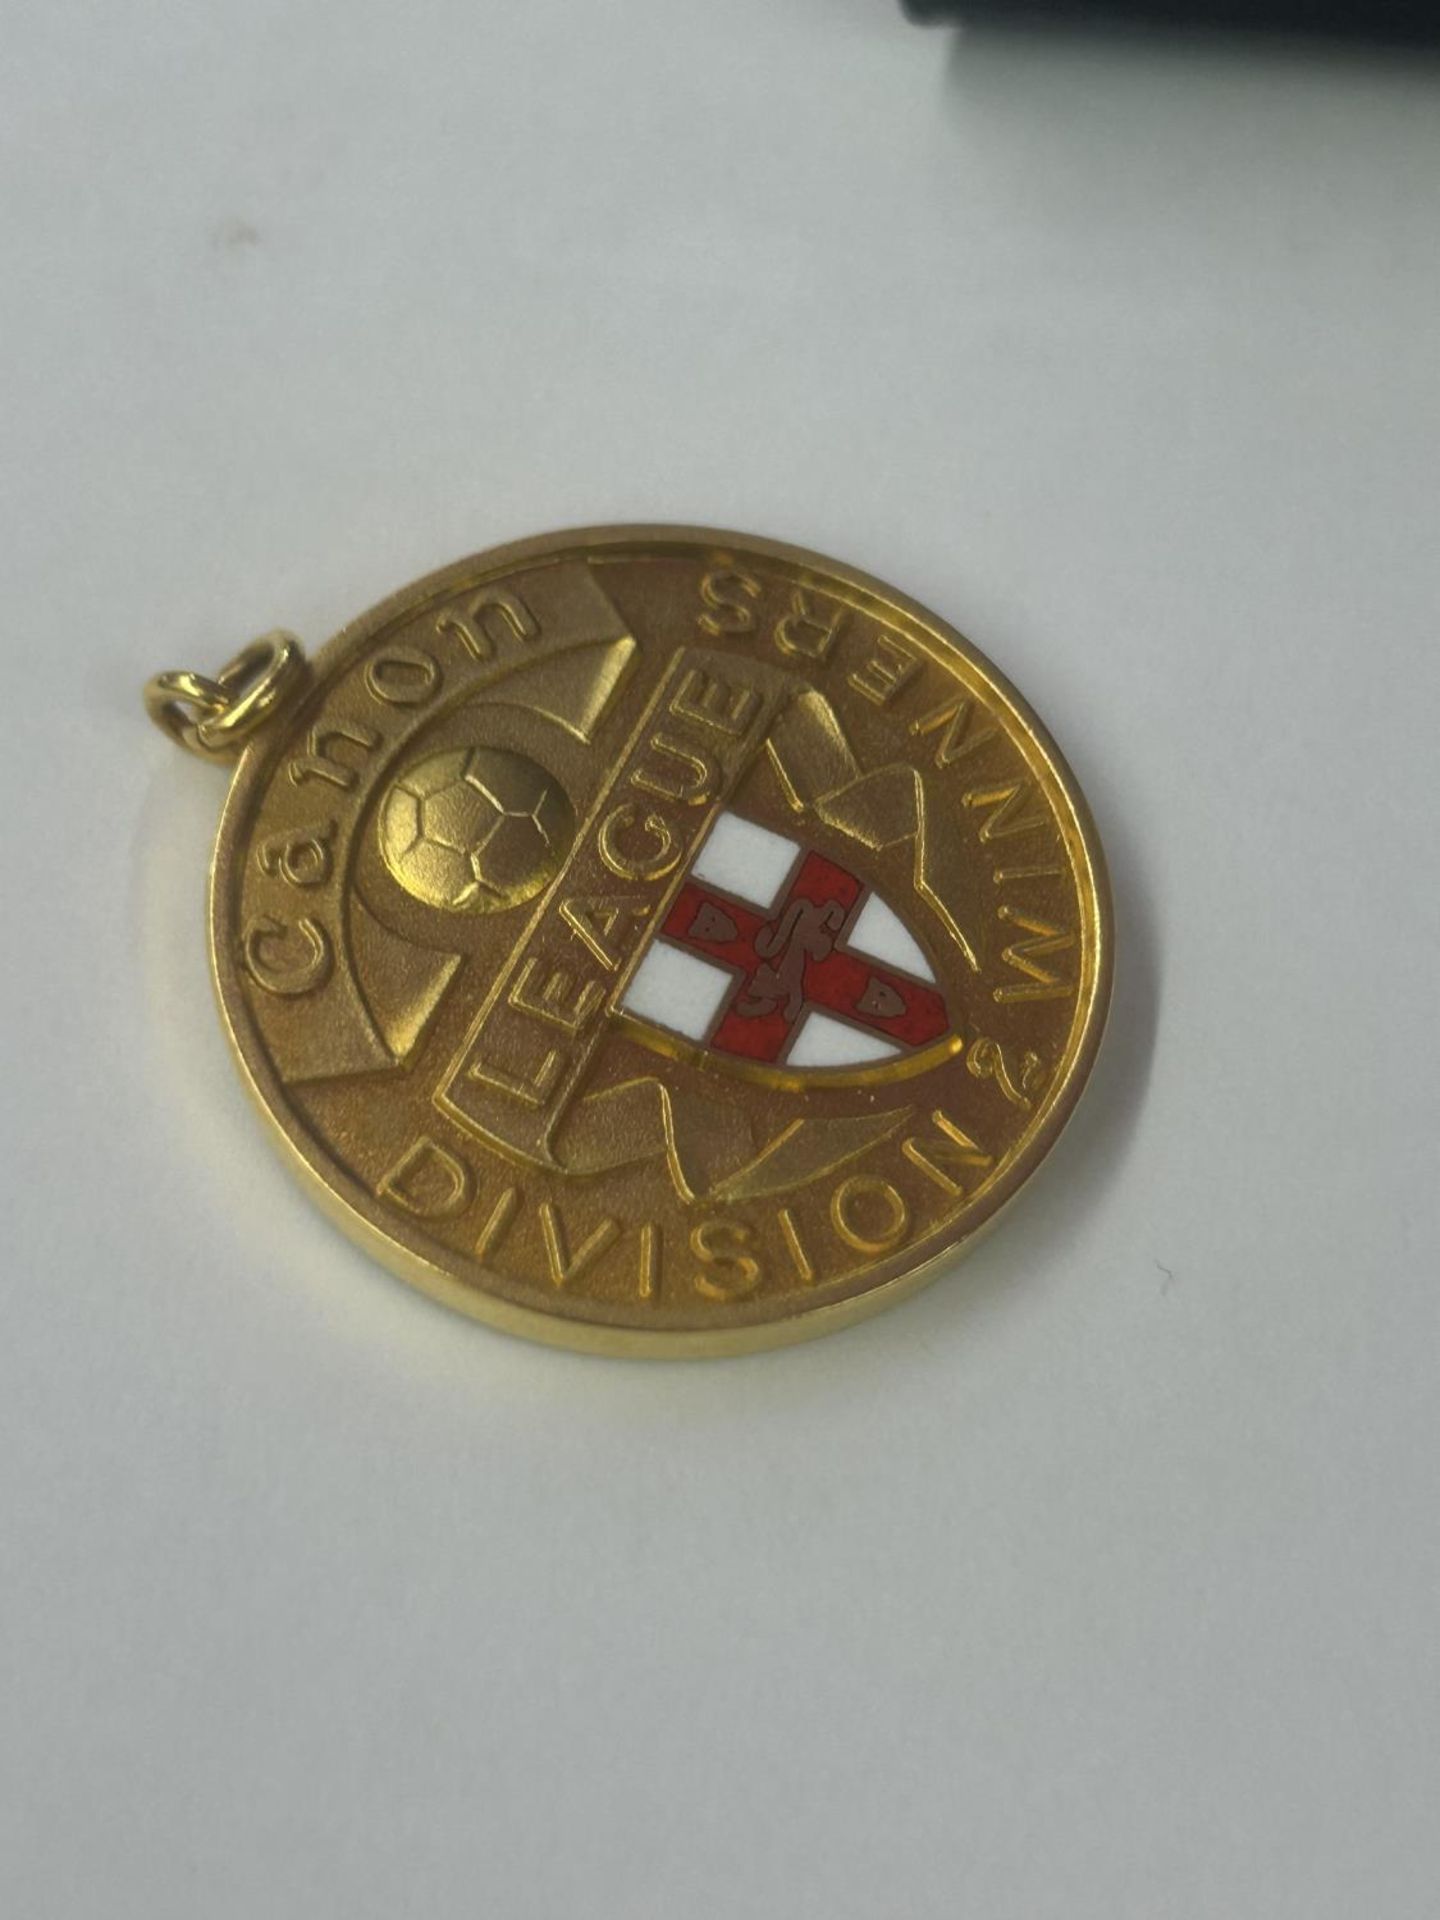 A HALLMARKED 9 CARAT GOLD & ENAMEL FOOTBALL LEAGUE CANON DIVISION 2 LEAGUE WINNERS MEDAL 1984-1985 - Image 4 of 5